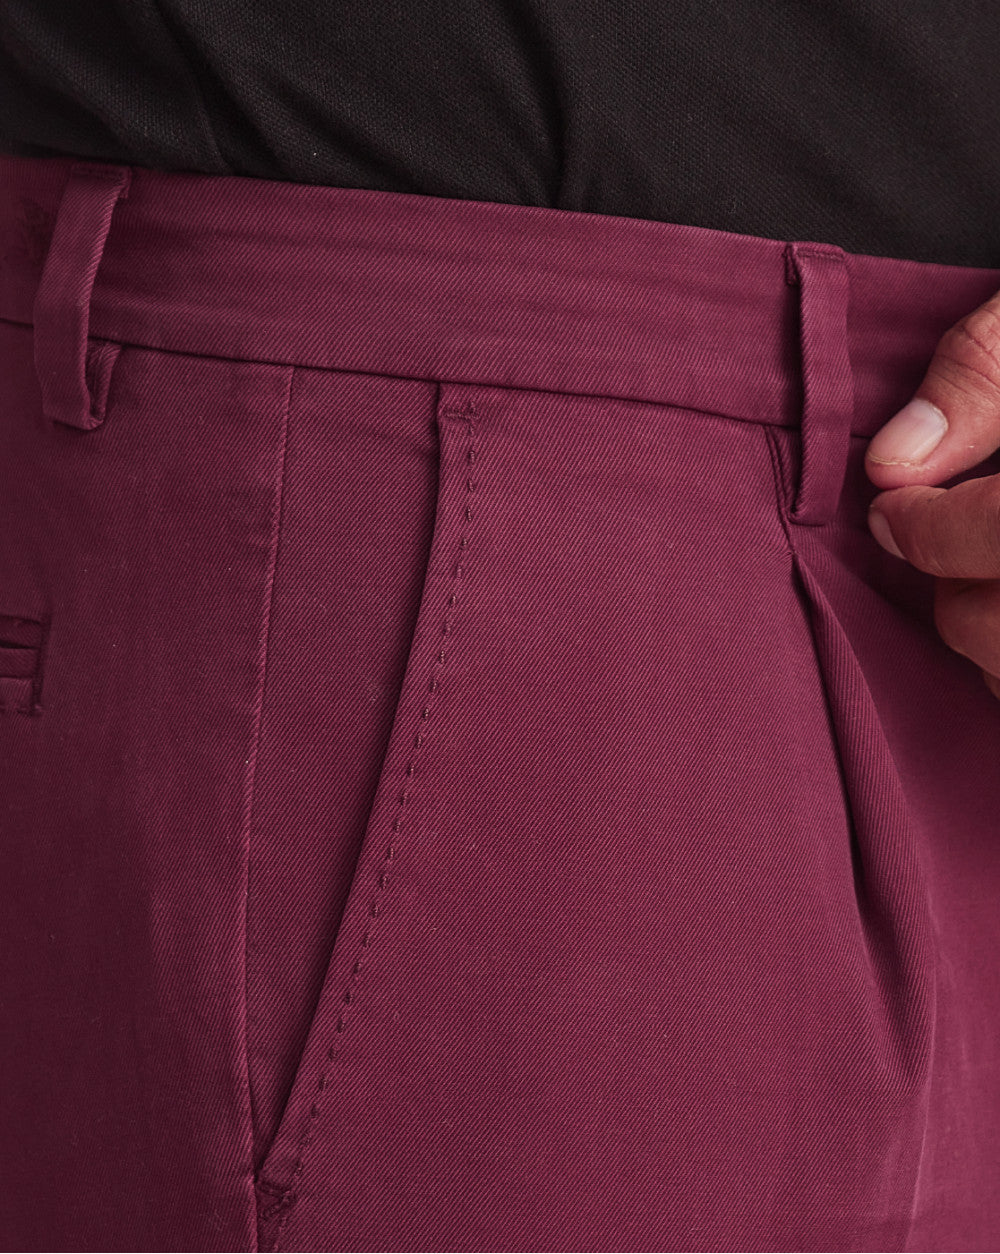 Single Pleated Relaxed Fit Garment Dyed - Maroon